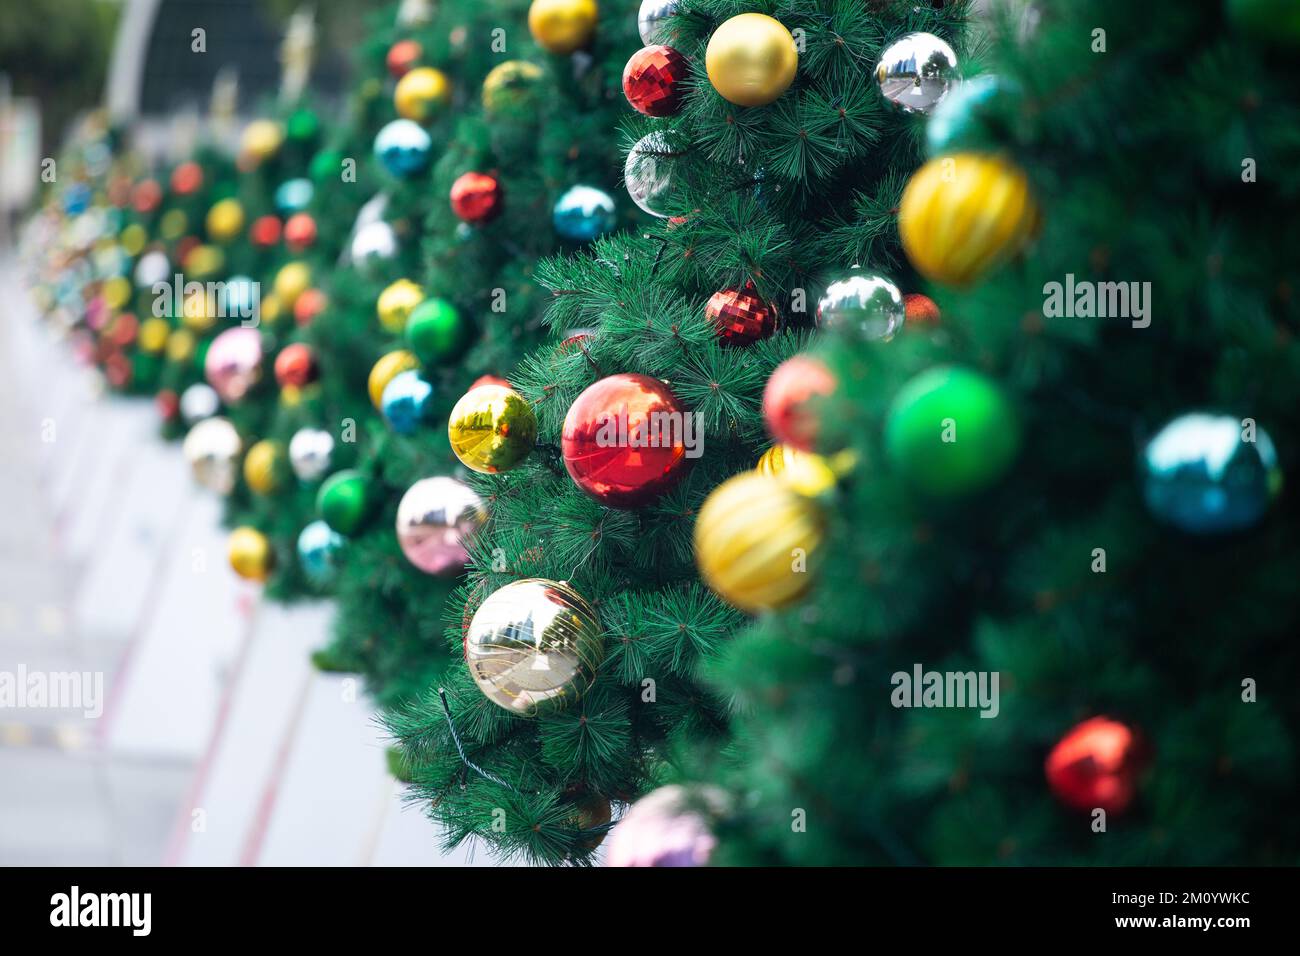 Diagonal view of a row Christmas trees decoration at outdoor environment. Stock Photo